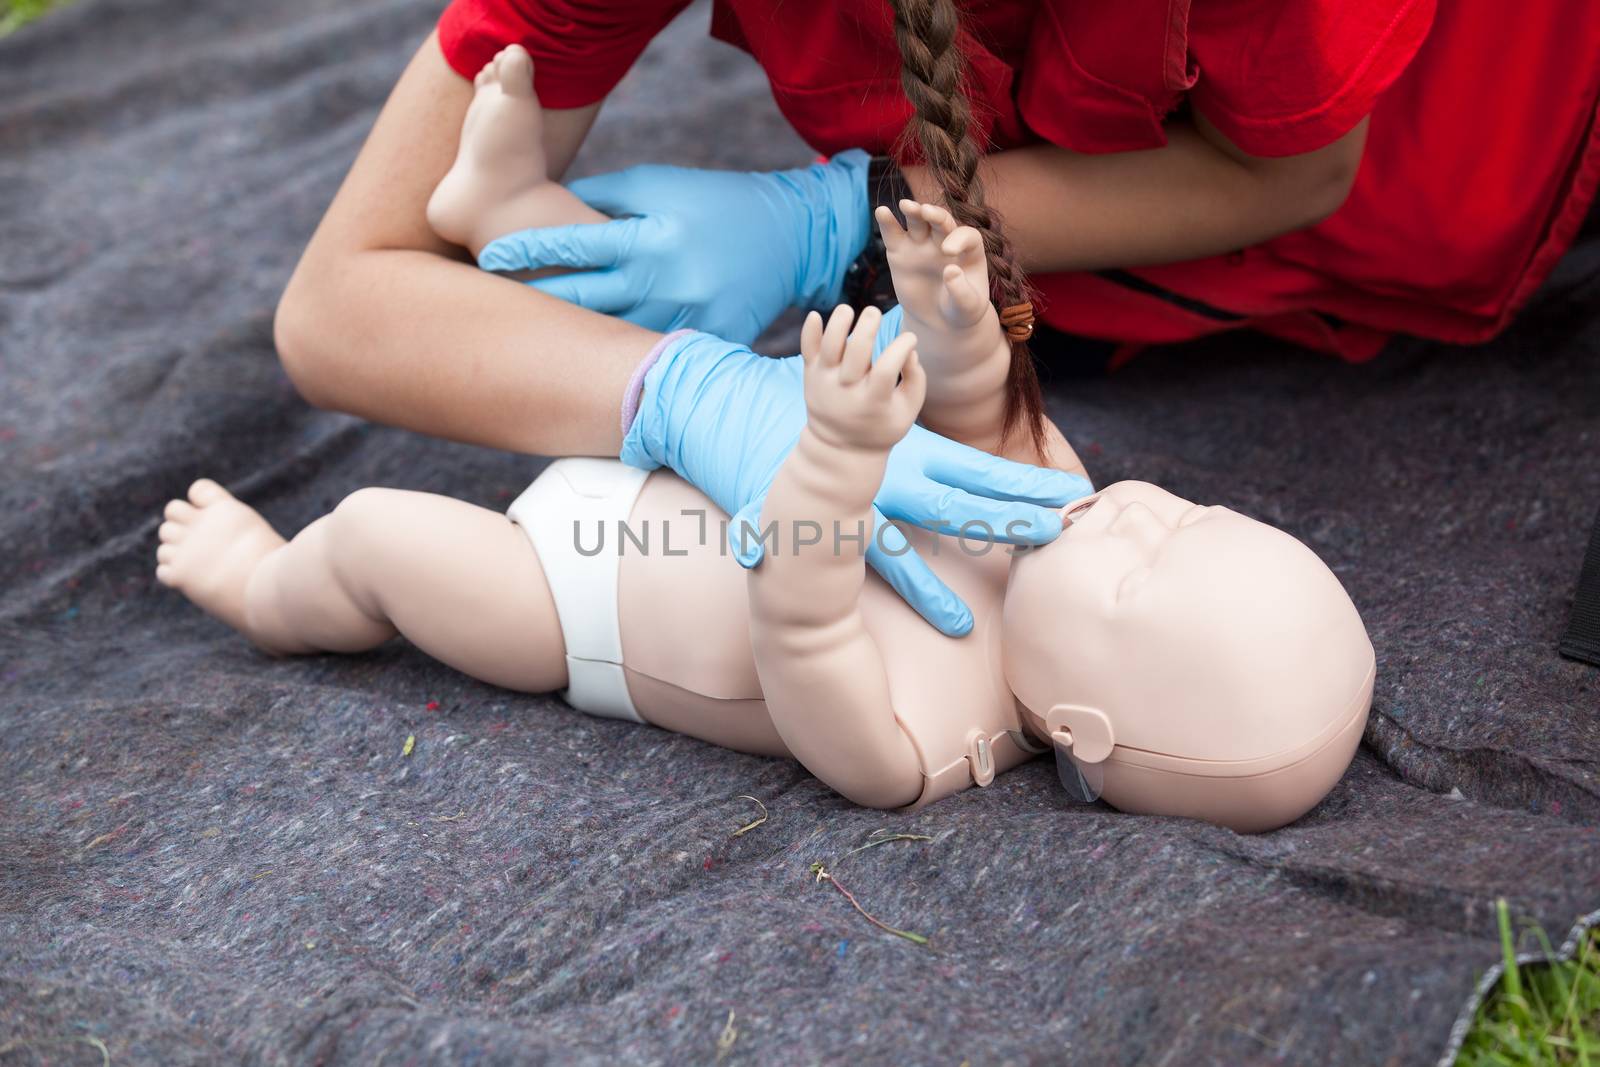 Infant CPR manikin first aid. Cardiopulmonary resuscitation - CPR.